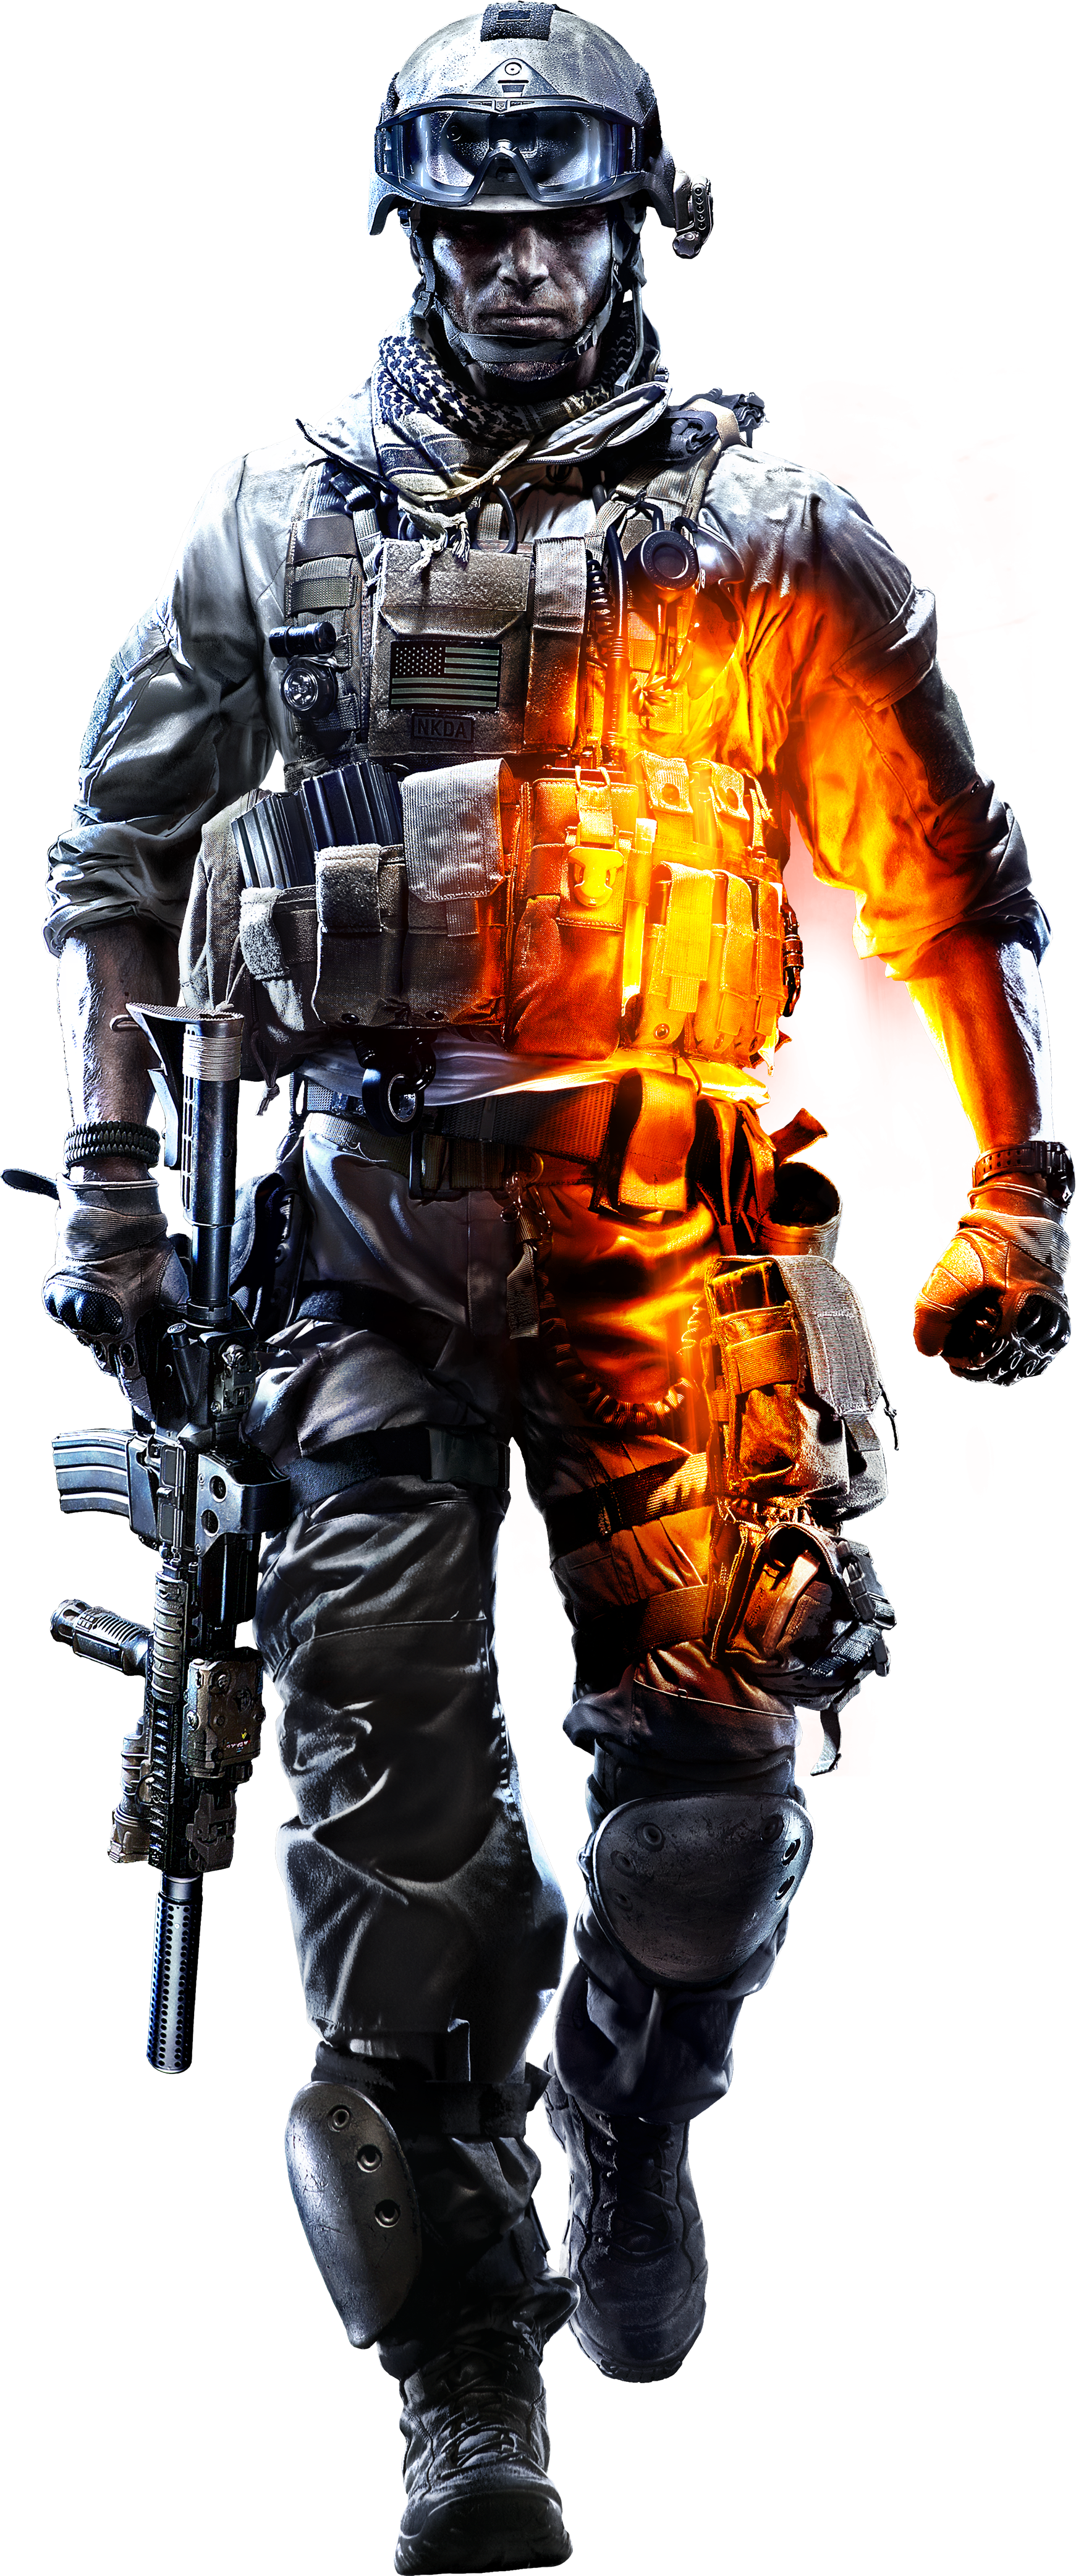 Image   Promotional Soldier Bf3 Hq Render.png | Battlefield Wiki | Fandom Powered By Wikia - Battlefield, Transparent background PNG HD thumbnail